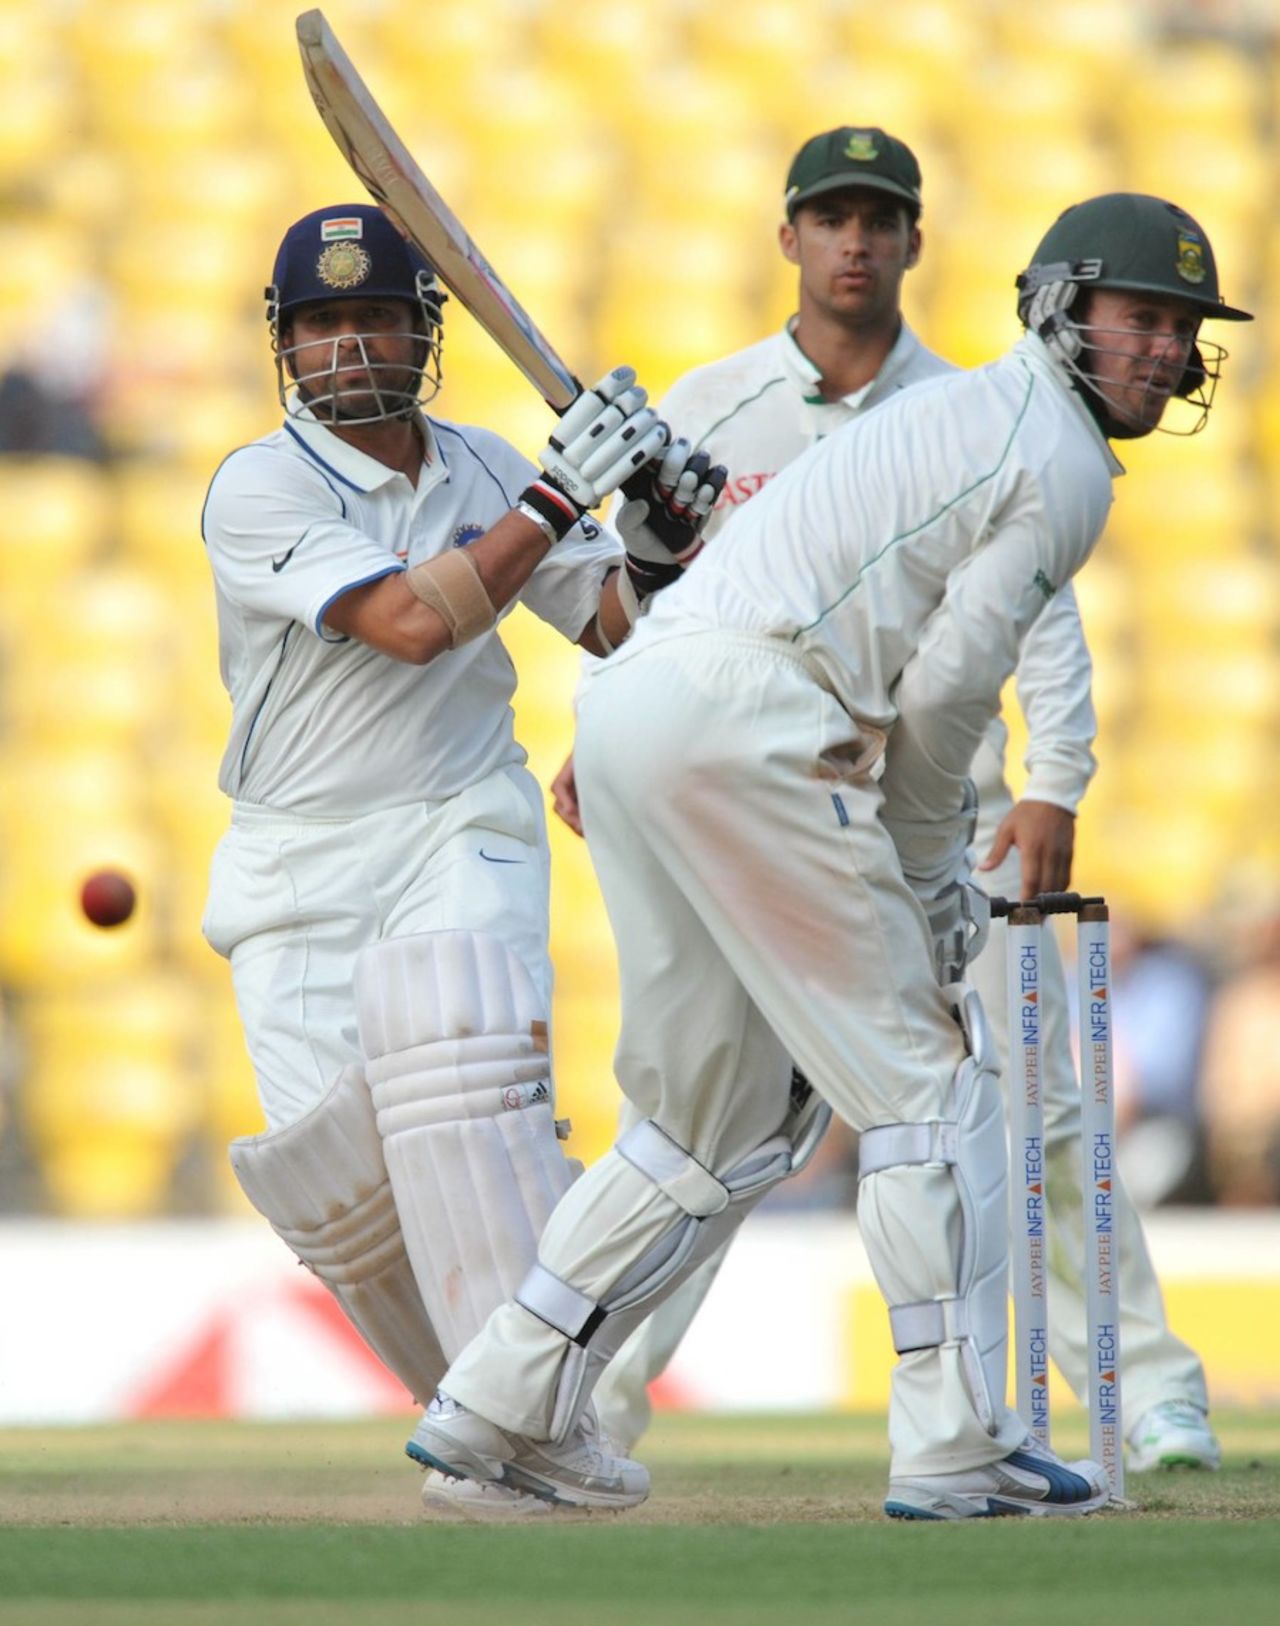 Sachin Tendulkar places the ball past the wicketkeeper, India v South Africa, 1st Test, Nagpur, 4th day, February 9, 2010